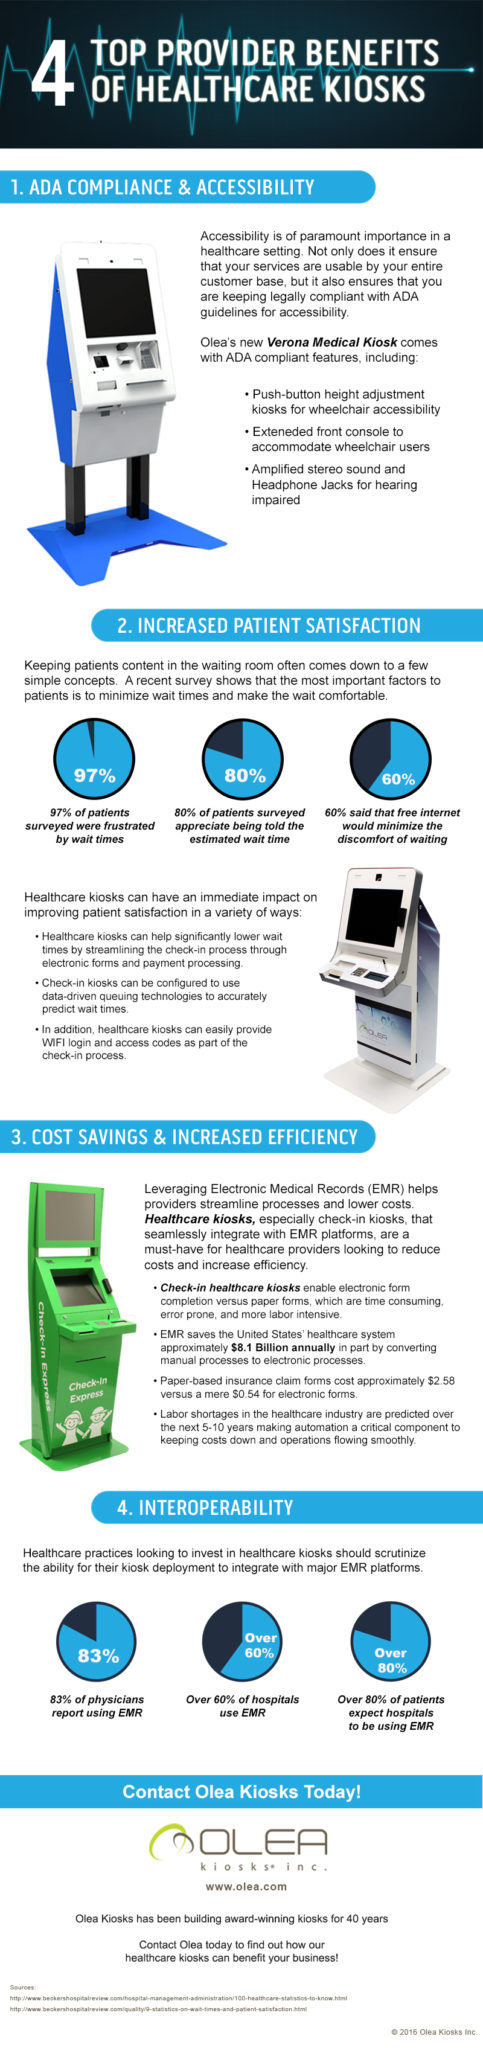 Top 4 Provider Benefits with Healthcare Kiosks